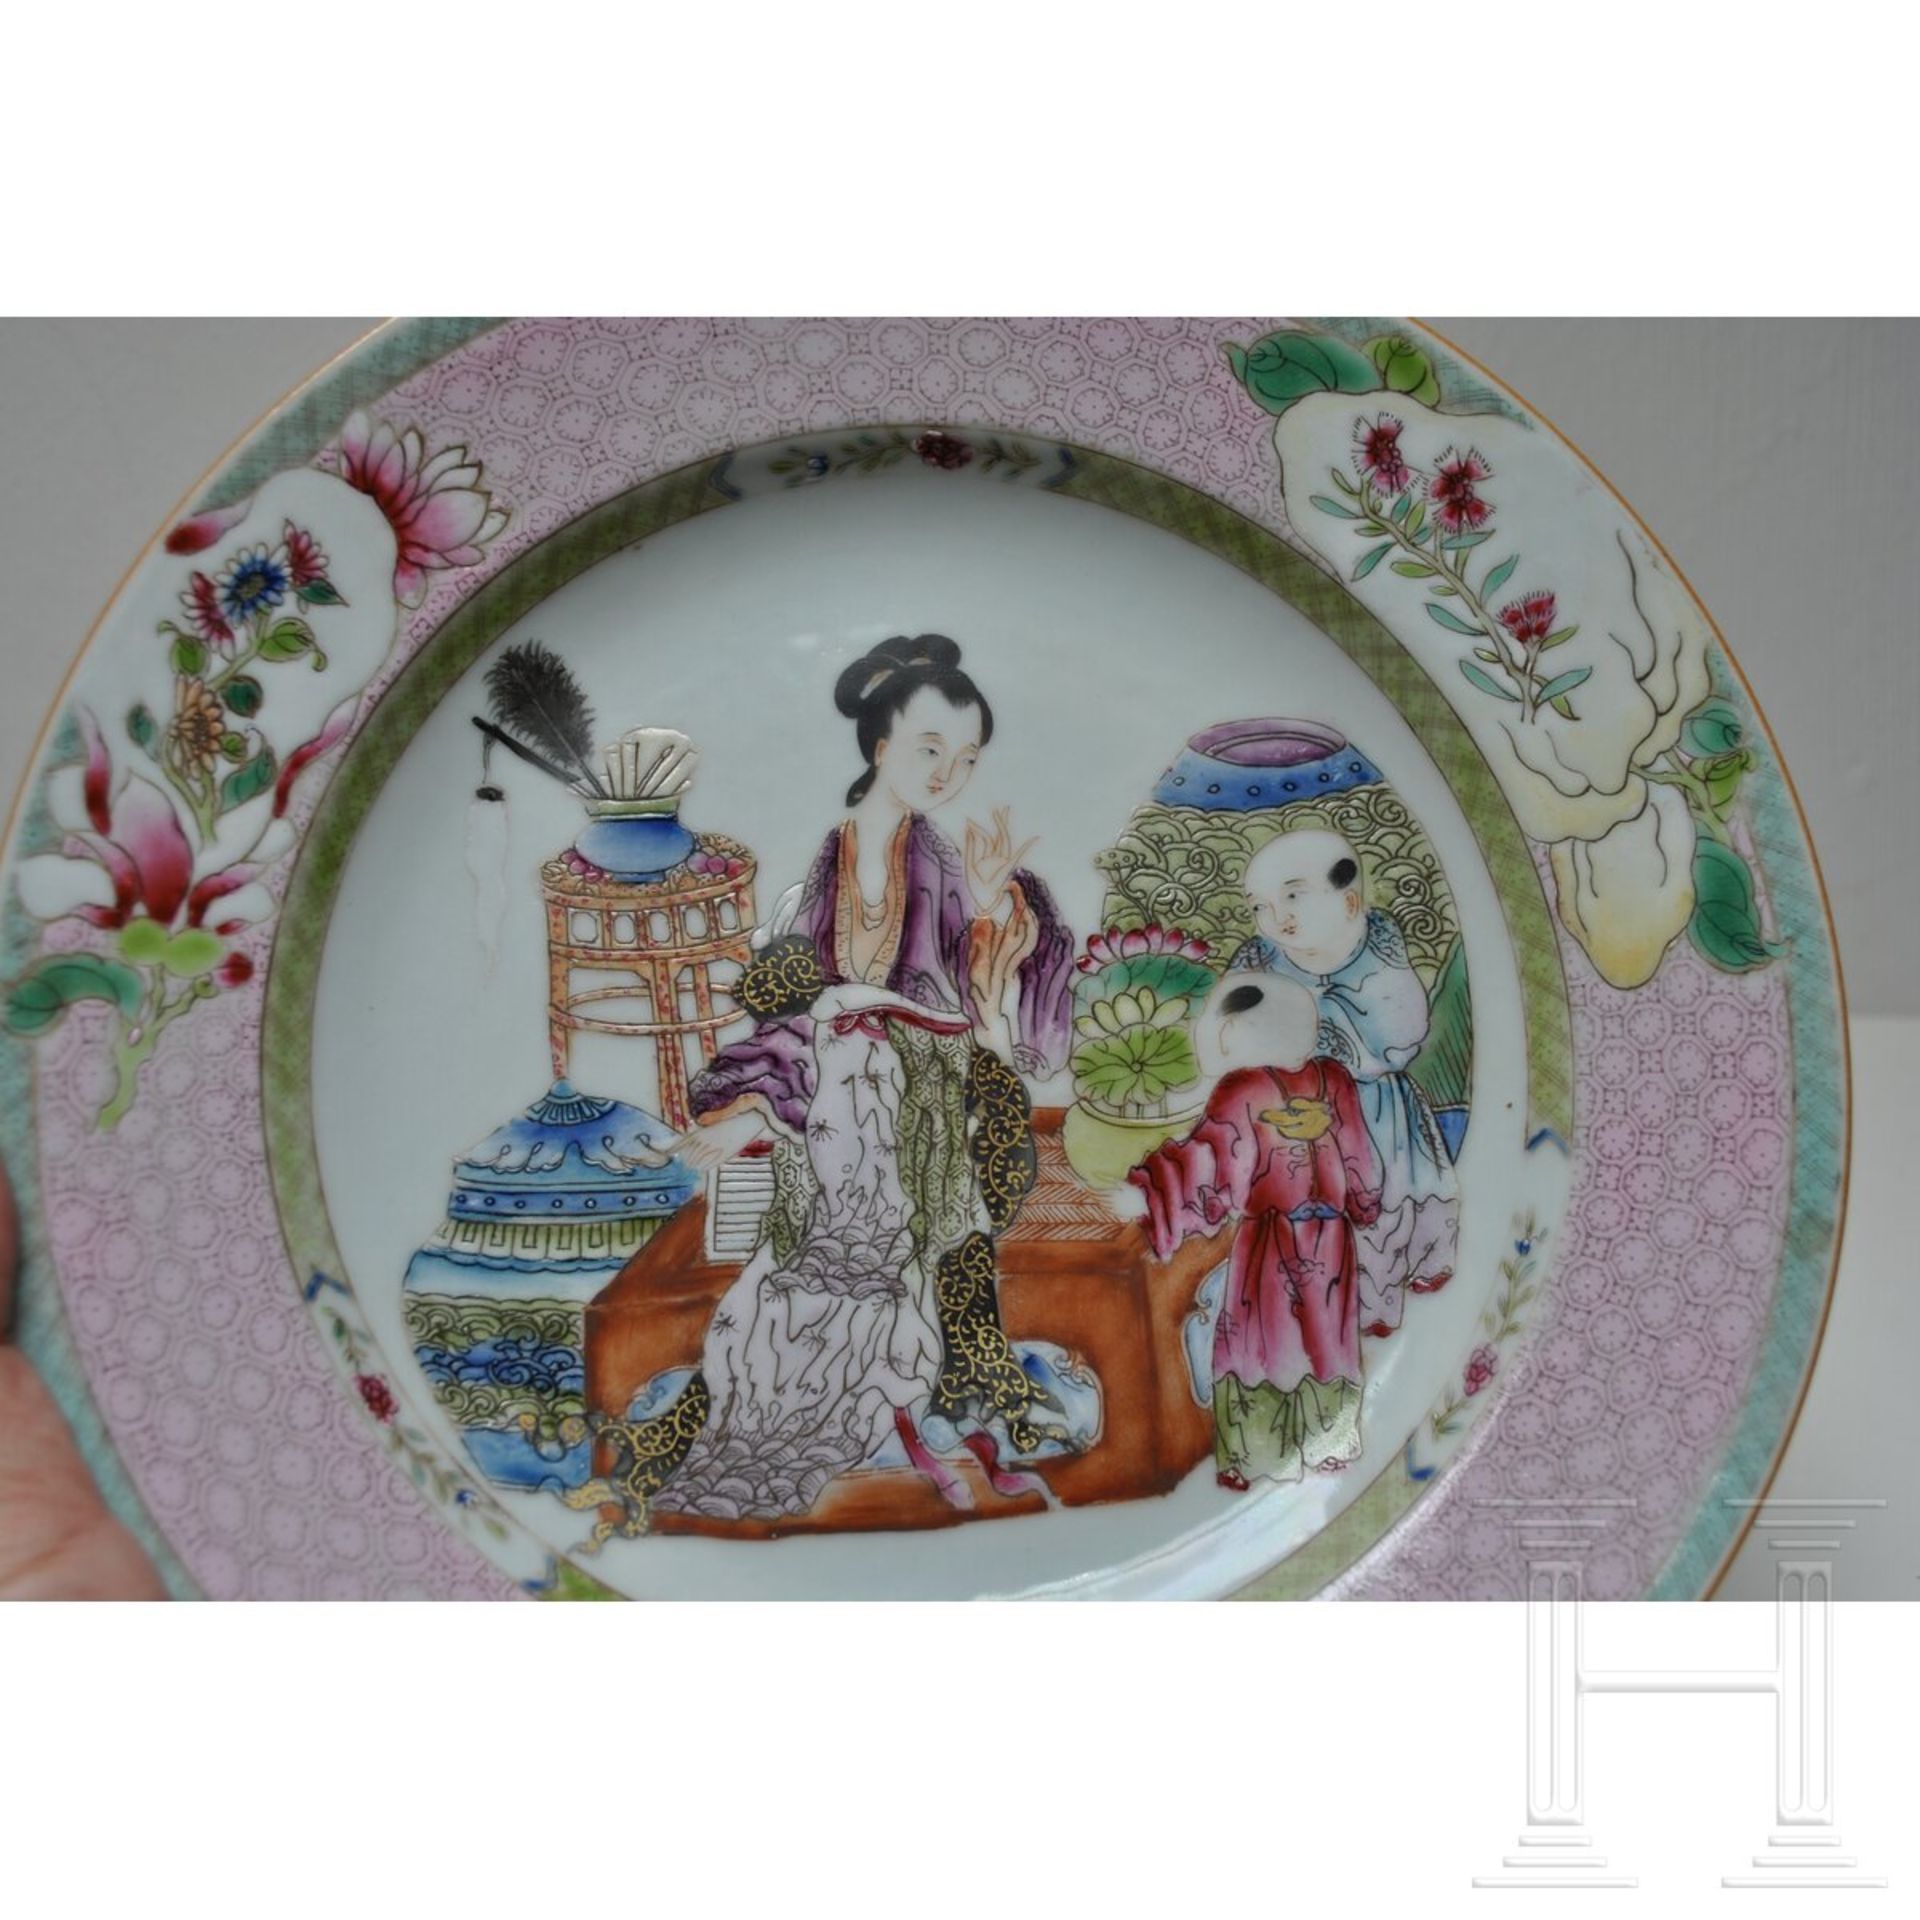 Famille Rose-Teller, Exportware, wohl Qianlong-Periode (1735 - 1796), 18. Jhdt. - Image 4 of 16